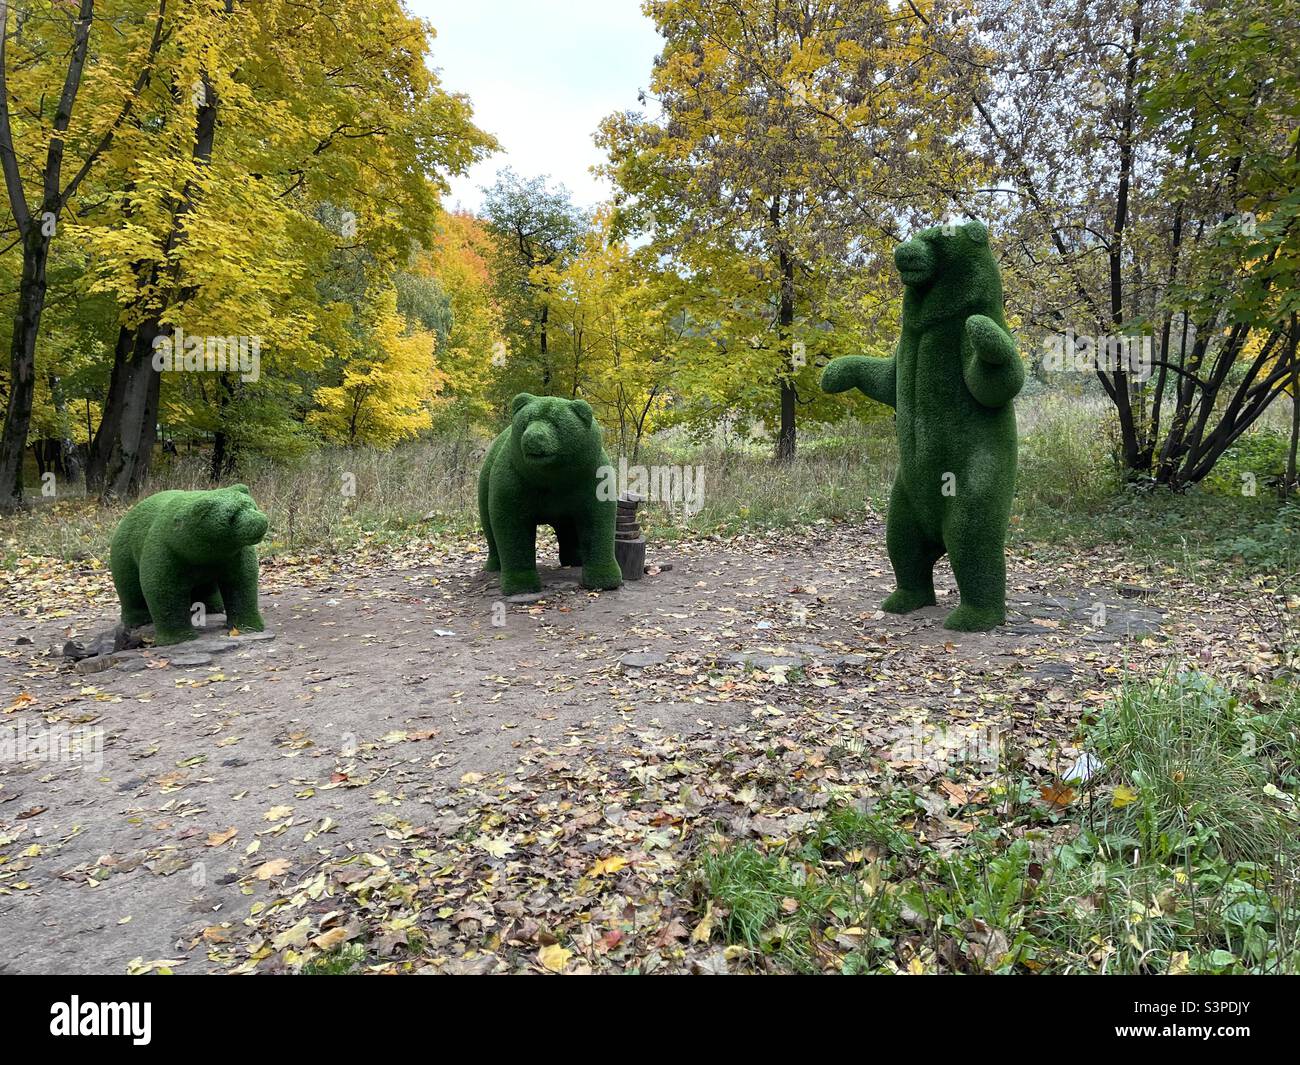 Three bears sculptures made of fake grass Stock Photo